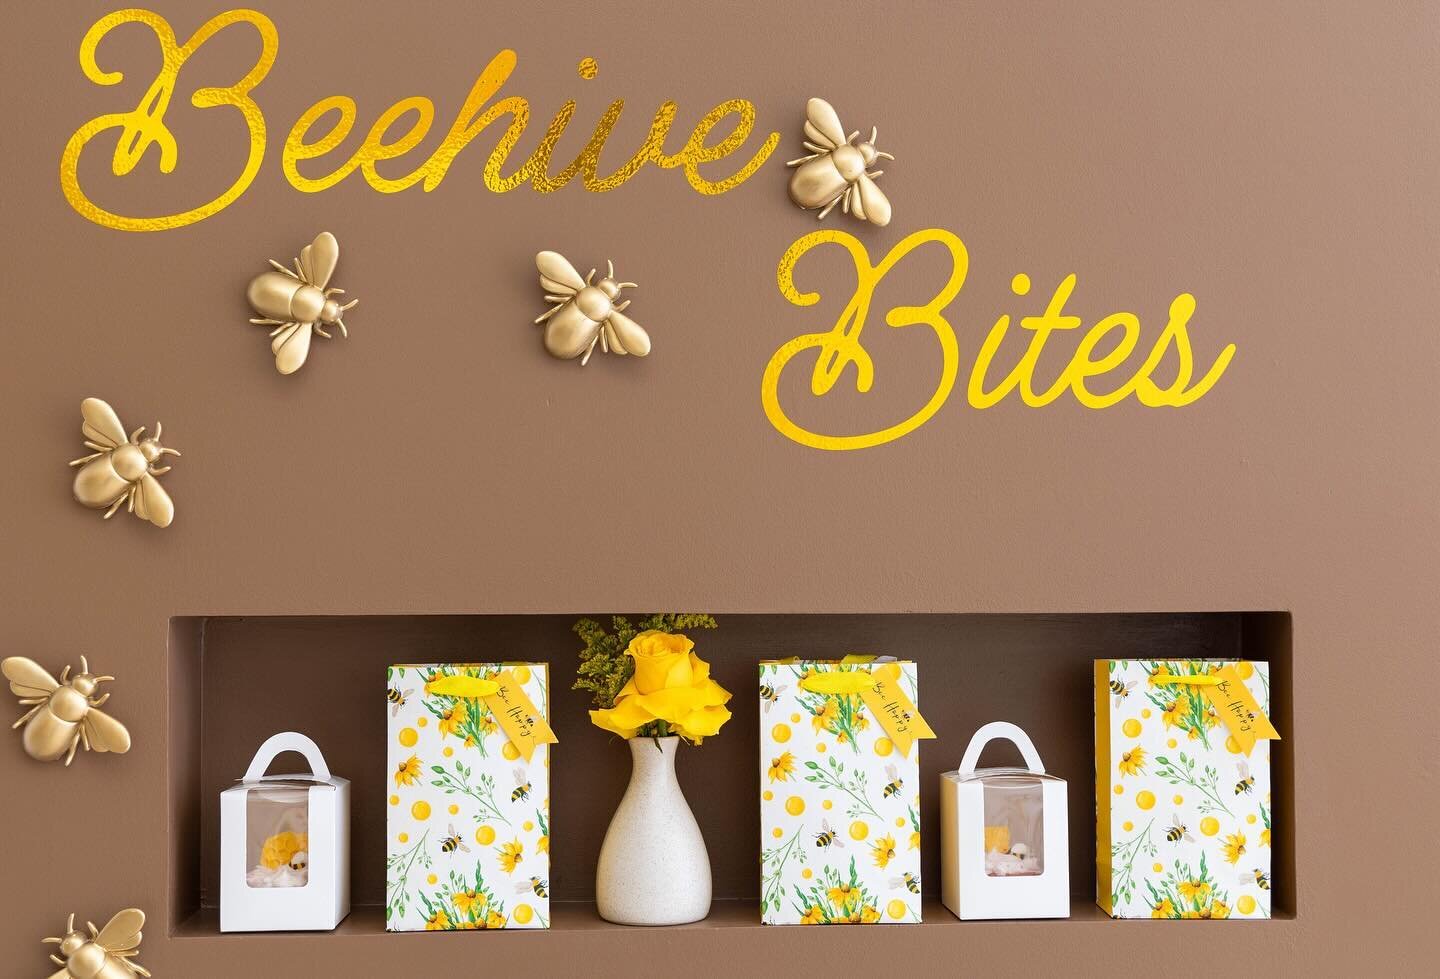 This is the end of our bee themed baby shower design. We hope you all enjoyed it as much as we did 🐝💛
.
.
#rentals #beetheme #babyshower #beethemedbabyshower #twins #eventdesign #eventdecor #eventdecorations